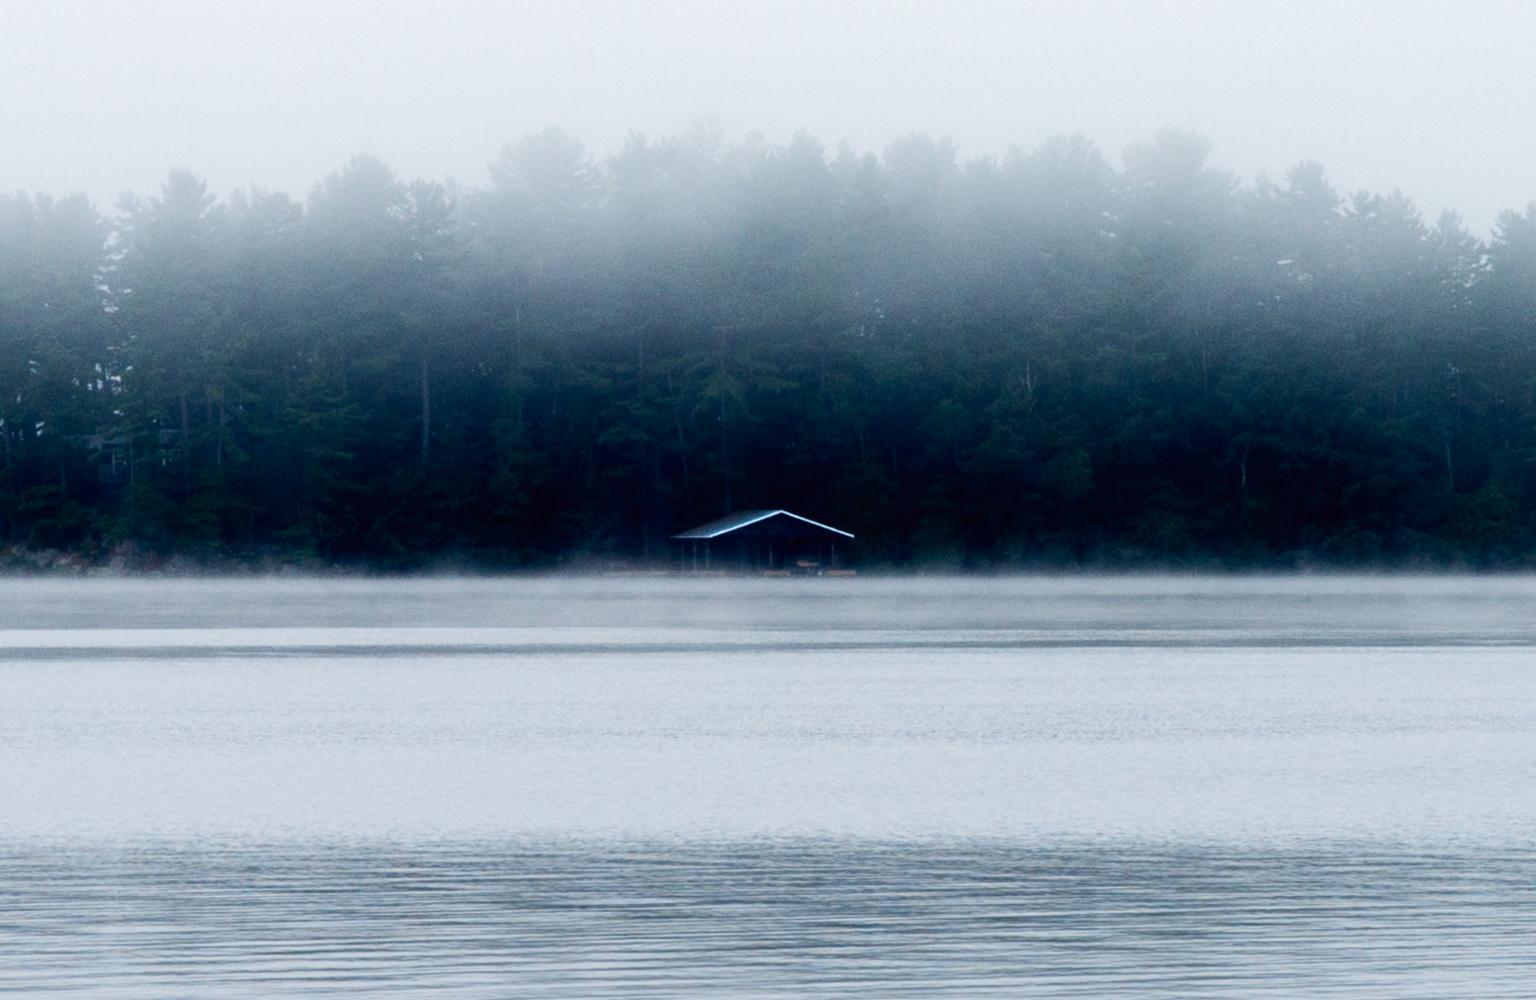 “Elevated Island” was shot on Lake Rosseau in Muskoka, Ontario, Canada in the summer of 2017. Edition - 1 / 5
Chris Thomaidis’ photography is capable of finding the irony and elegance in the juxtapositions of the everyday.
